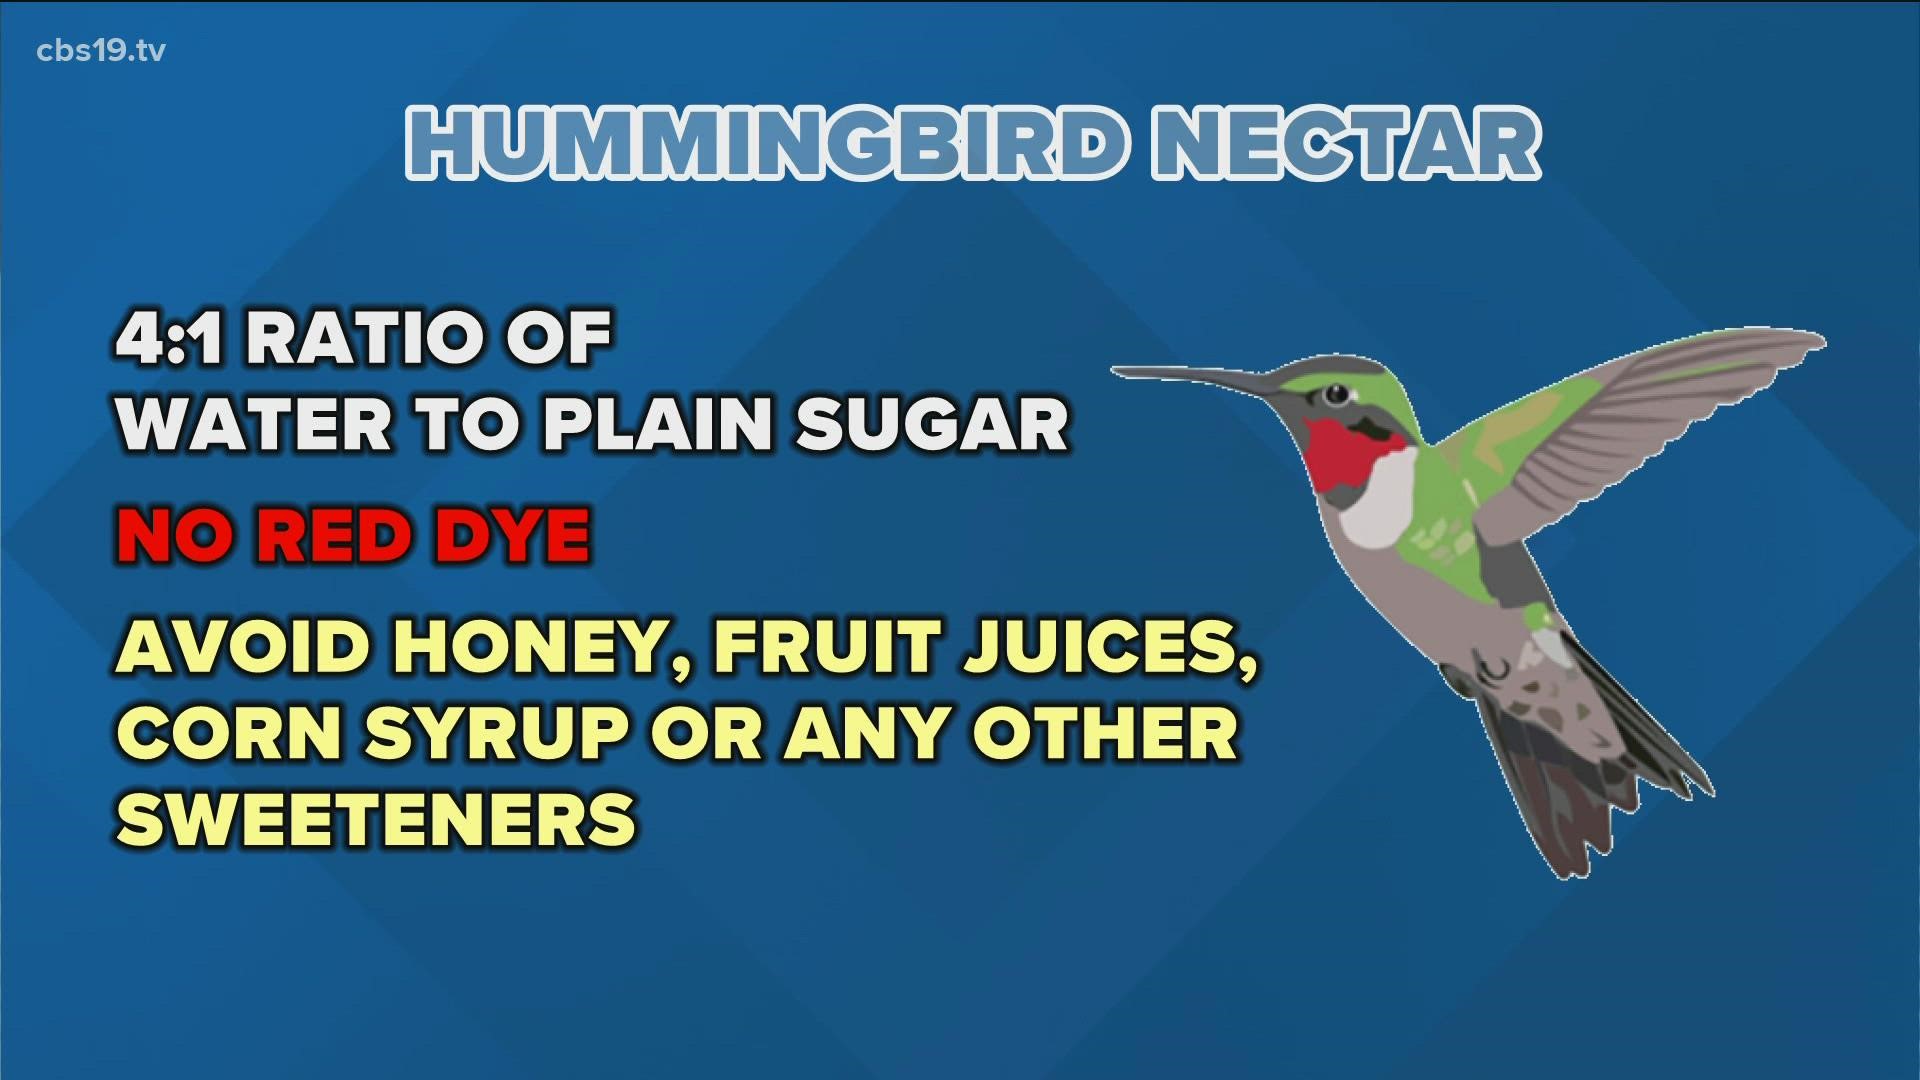 Its easy to attract the birds to your yard by creating a scenery of bright colors and featuring homemade nectar made of sugar and water